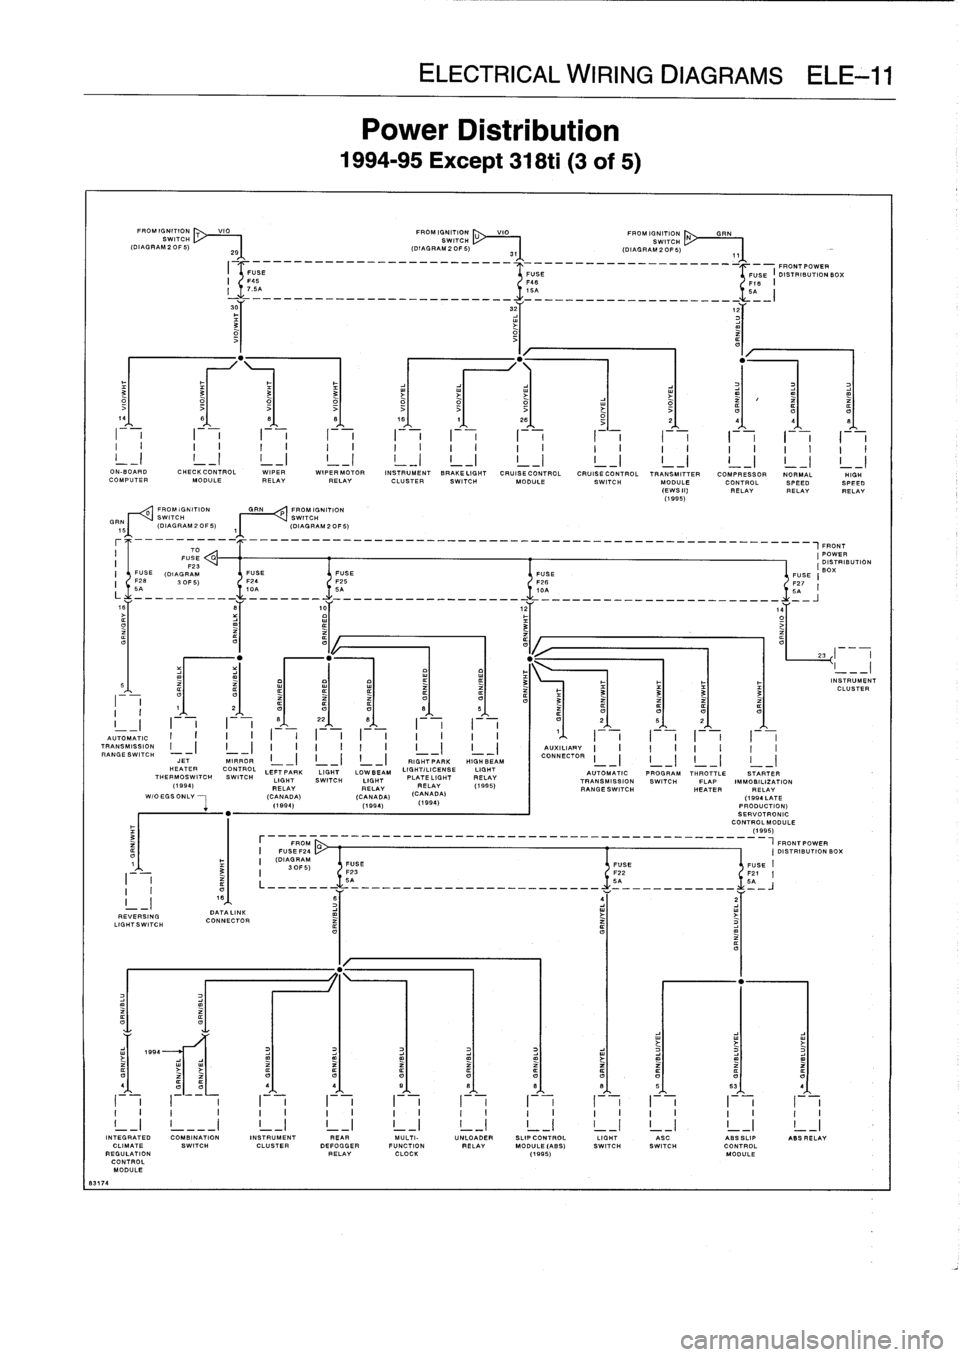 BMW M3 1993 E36 Workshop Manual 
8317
4

FROMIGNITION
T

	

VIO

	

FROM
IGNITION
U

	

VIO

	

"I"
IGNITION
SWITCH

	

SWITCH

	

SWITCH
(DIAGRAM2OF5)
29

	

(DIAGRAM20F5)
31

	

(DIAGRAM20F5)

FROMIGNITION
GRIN
PROMIGNITION
SWITCH